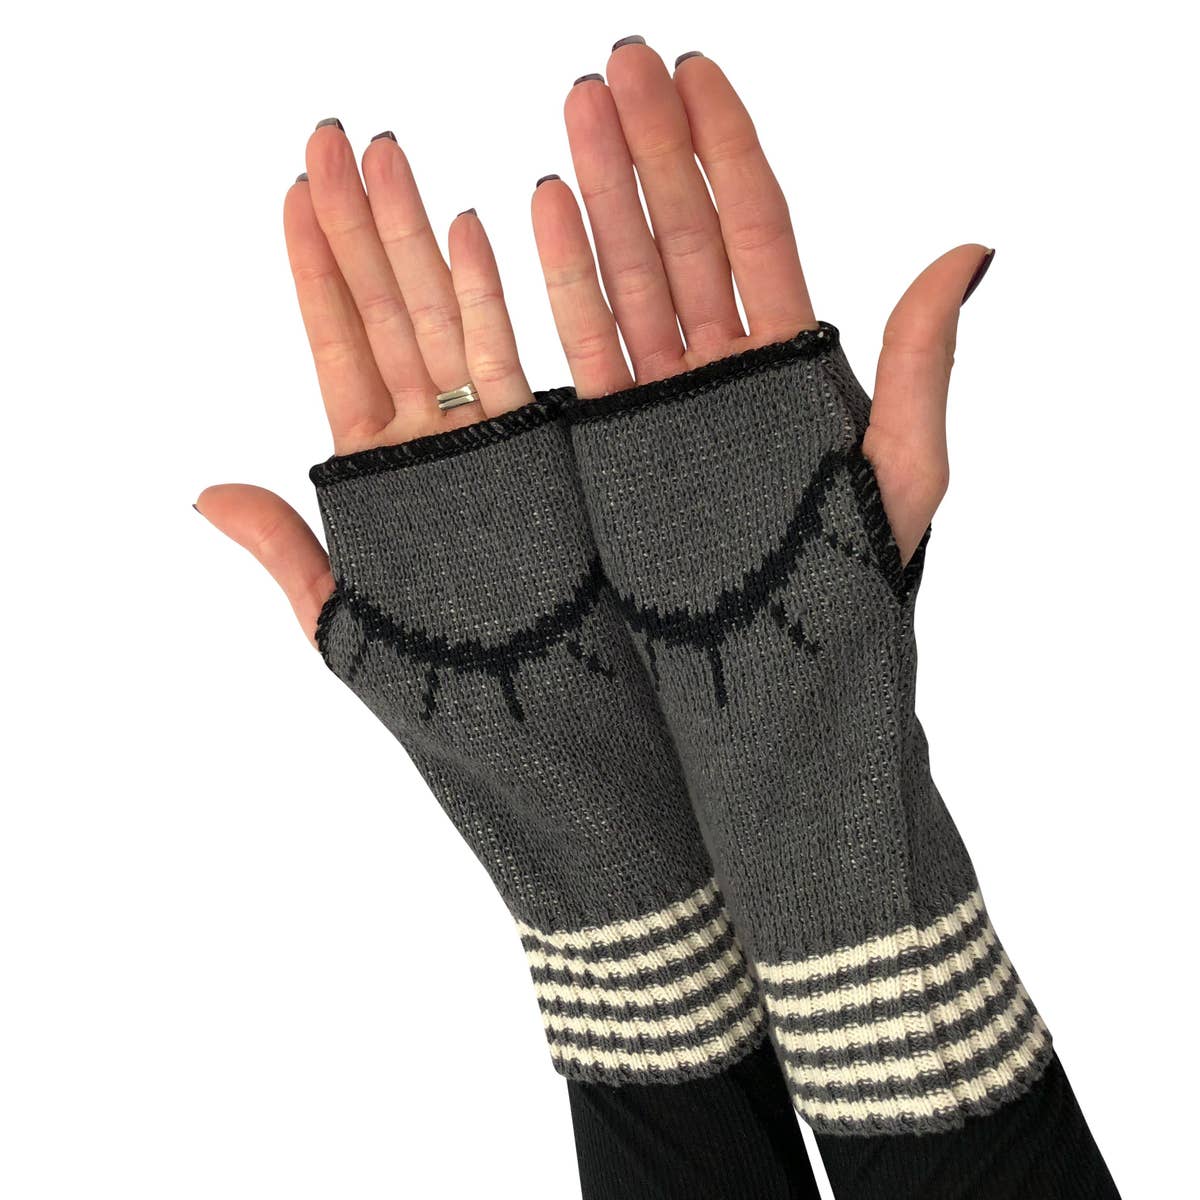 Details about   WOMENS LADIES RETRO ORGANIC COTTON FINGERLESS REVERSIBLE GLOVES HAND WARMERS 